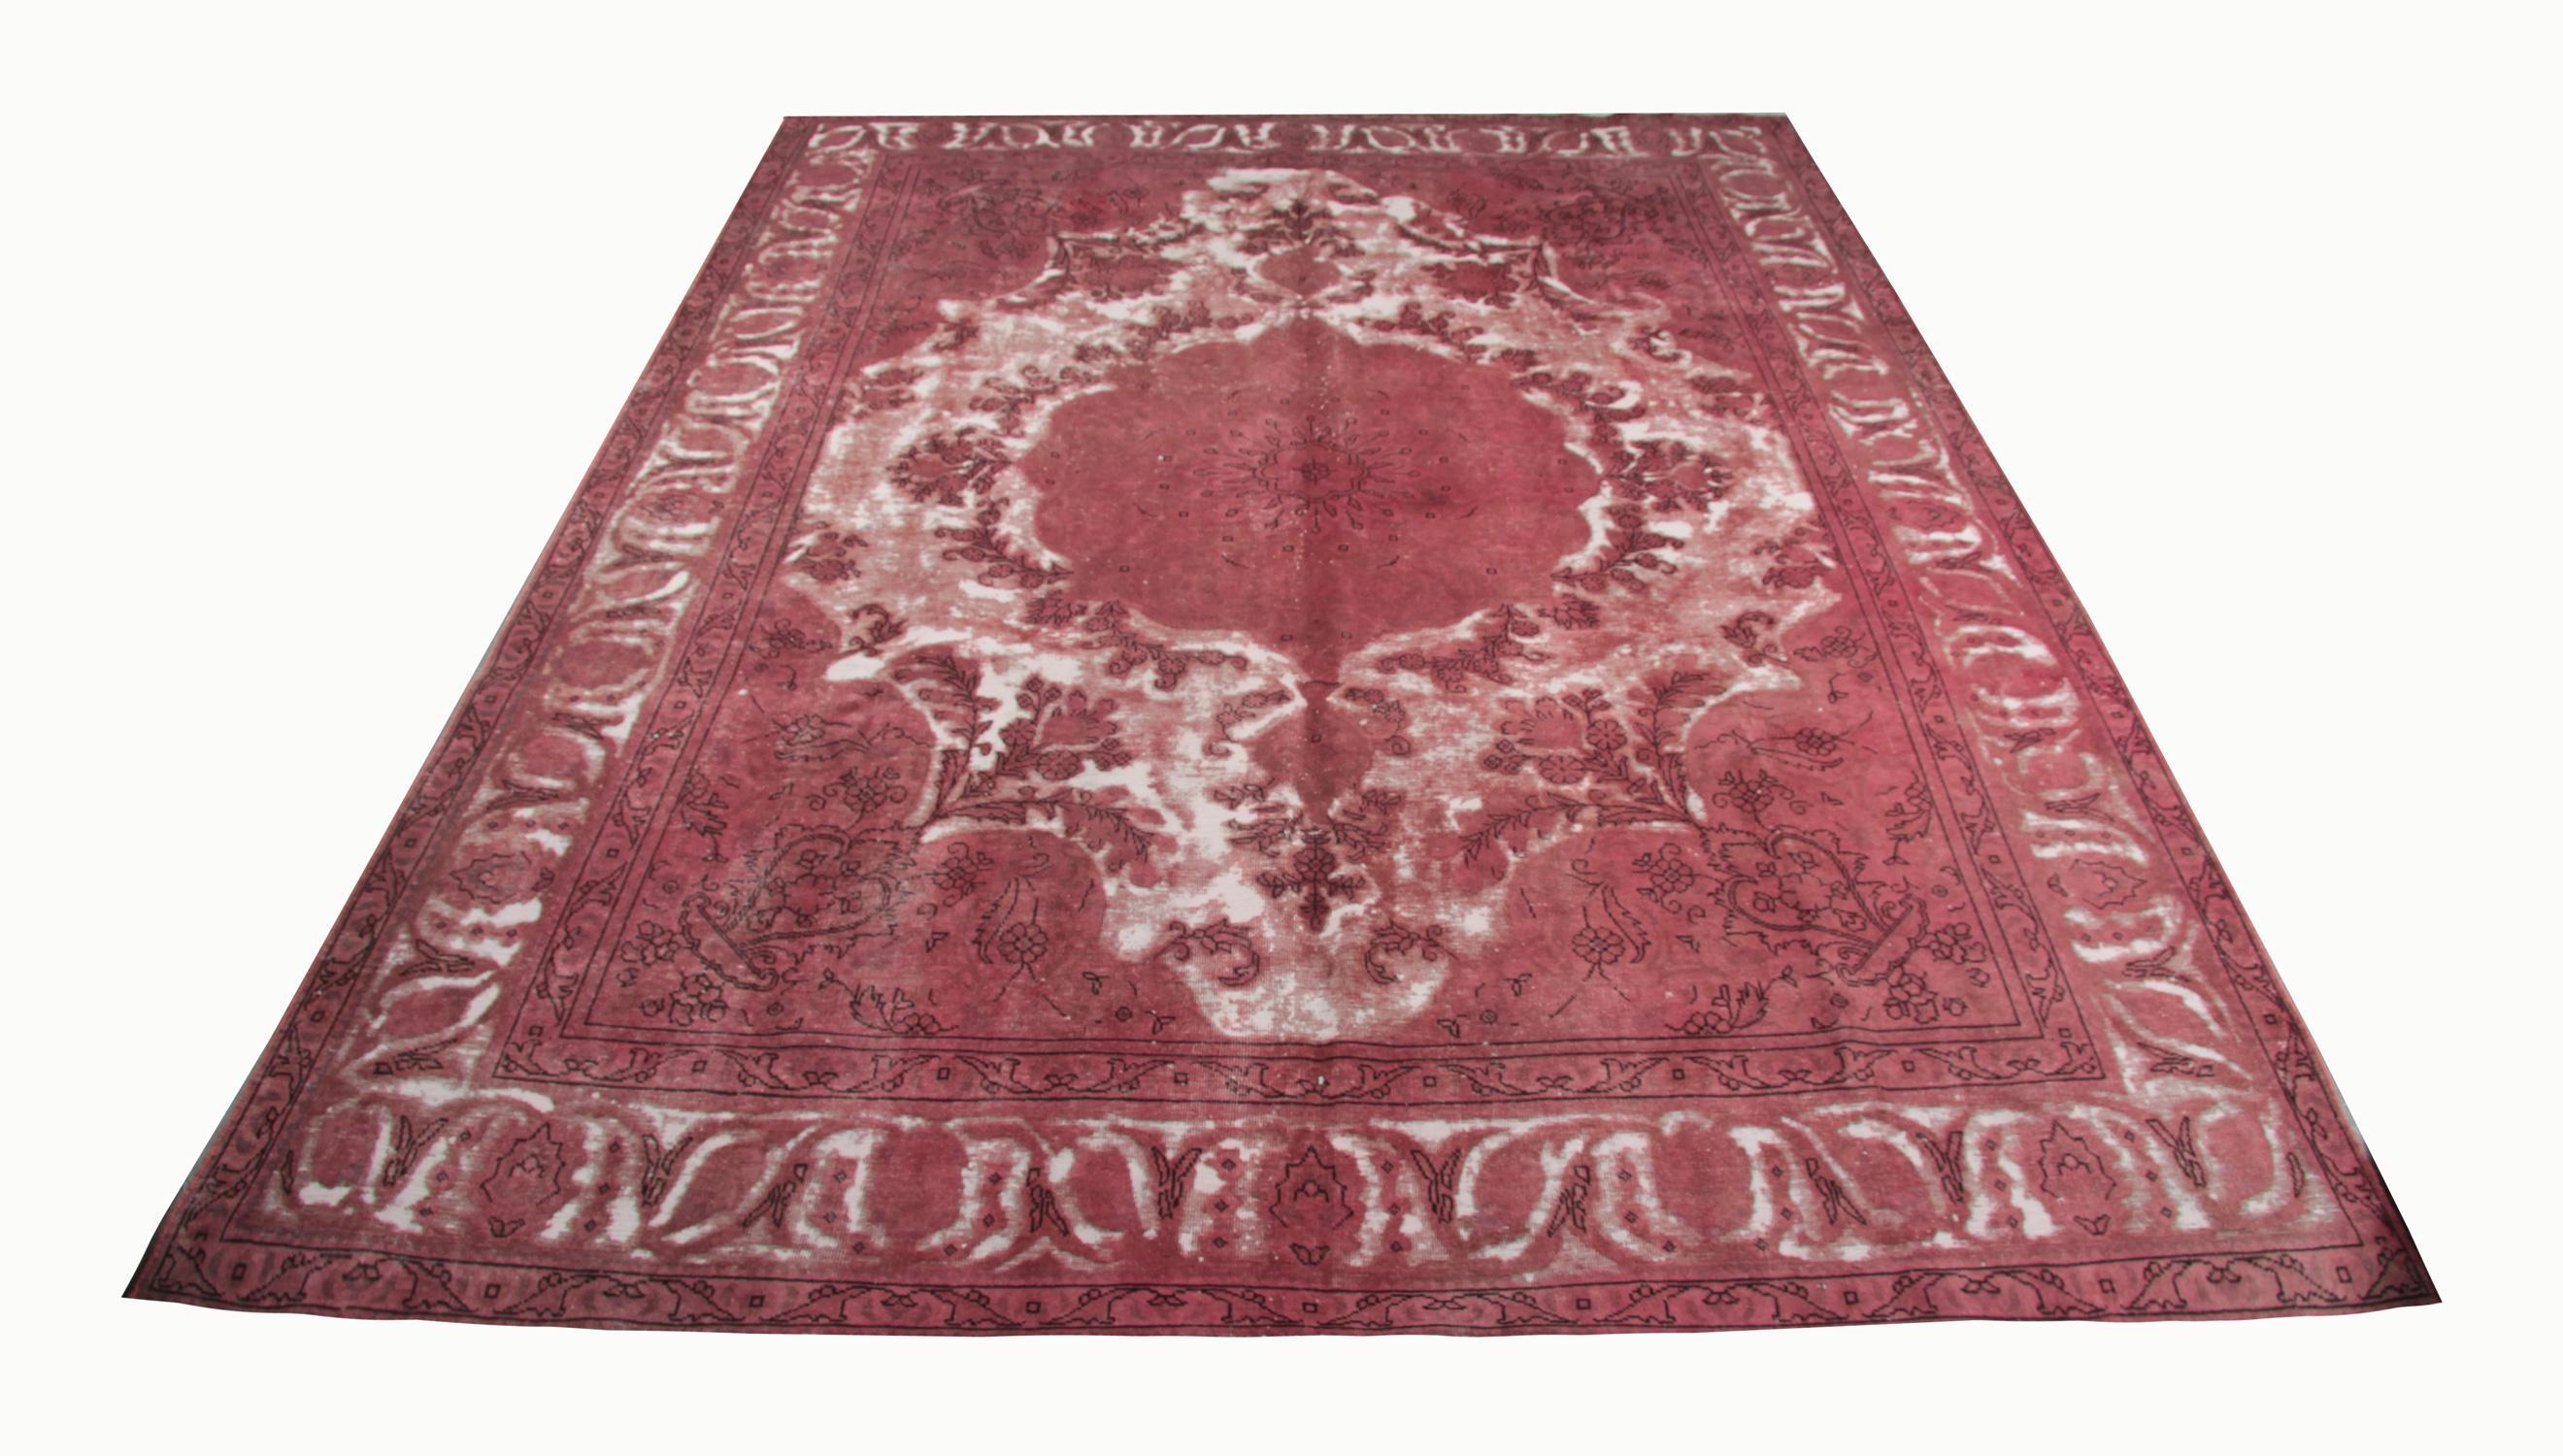 This oriental wool area rug was woven by hand in the late 20th century and featured an exquisite medallion design. Symmetrically woven with an intricate design featuring floral and geometric elements. The colours are simple with a traditional red